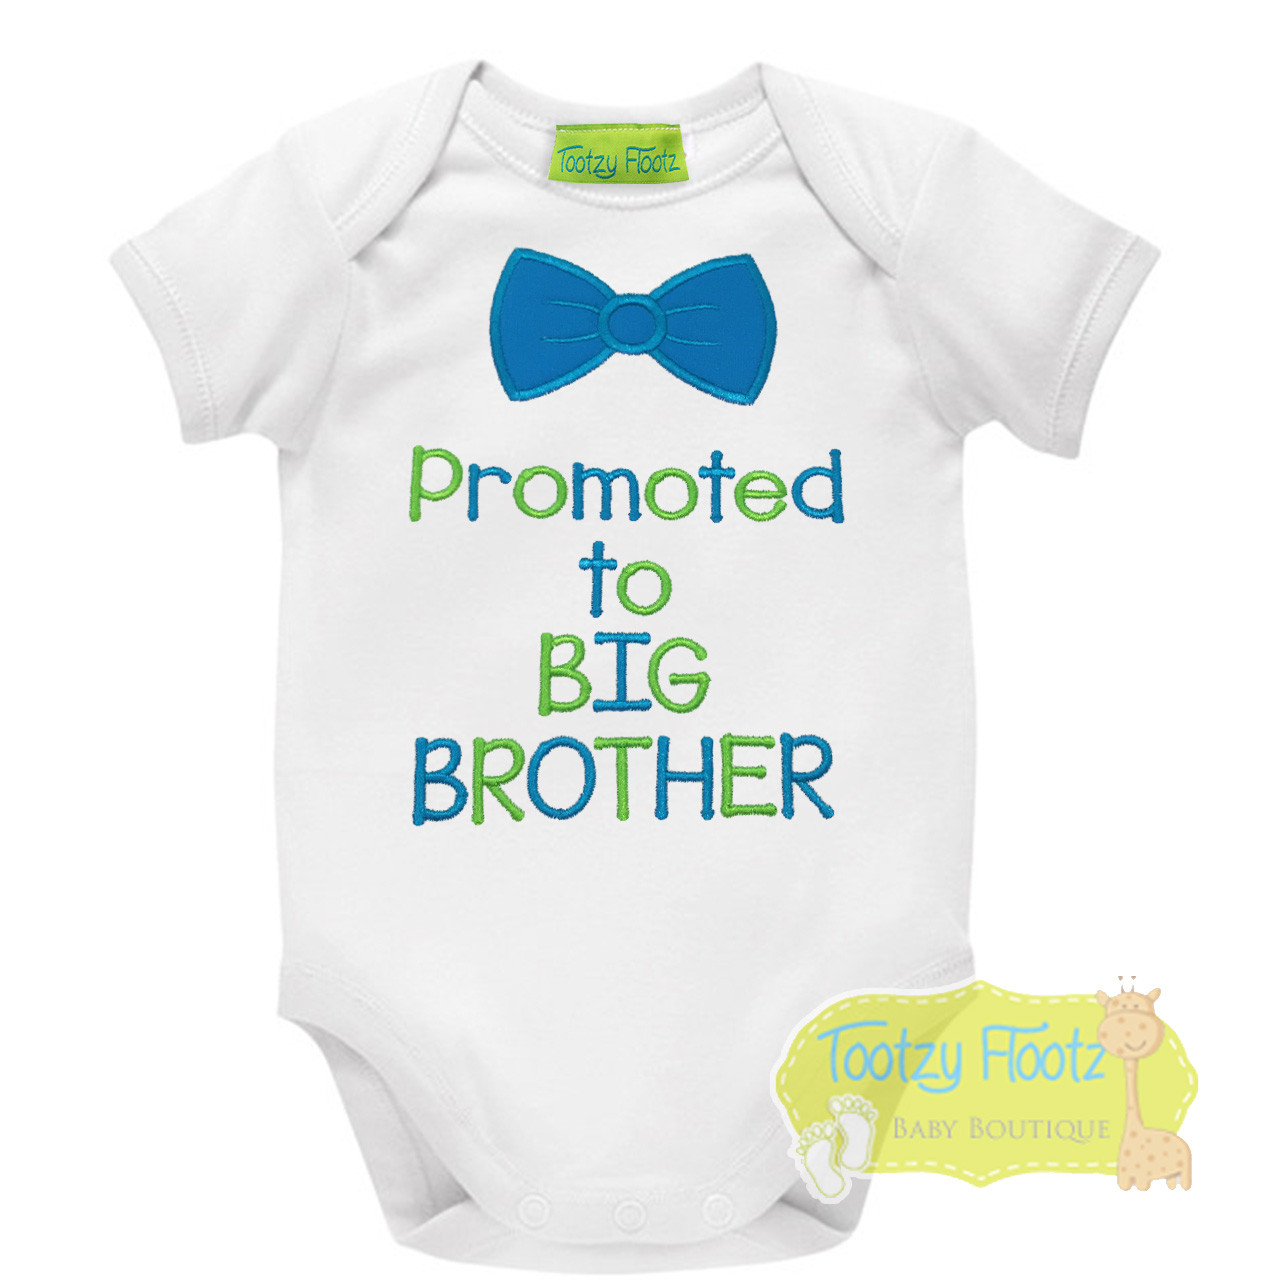 Promoted to BIG Brother (Bow Tie) - Tootzy Flootz